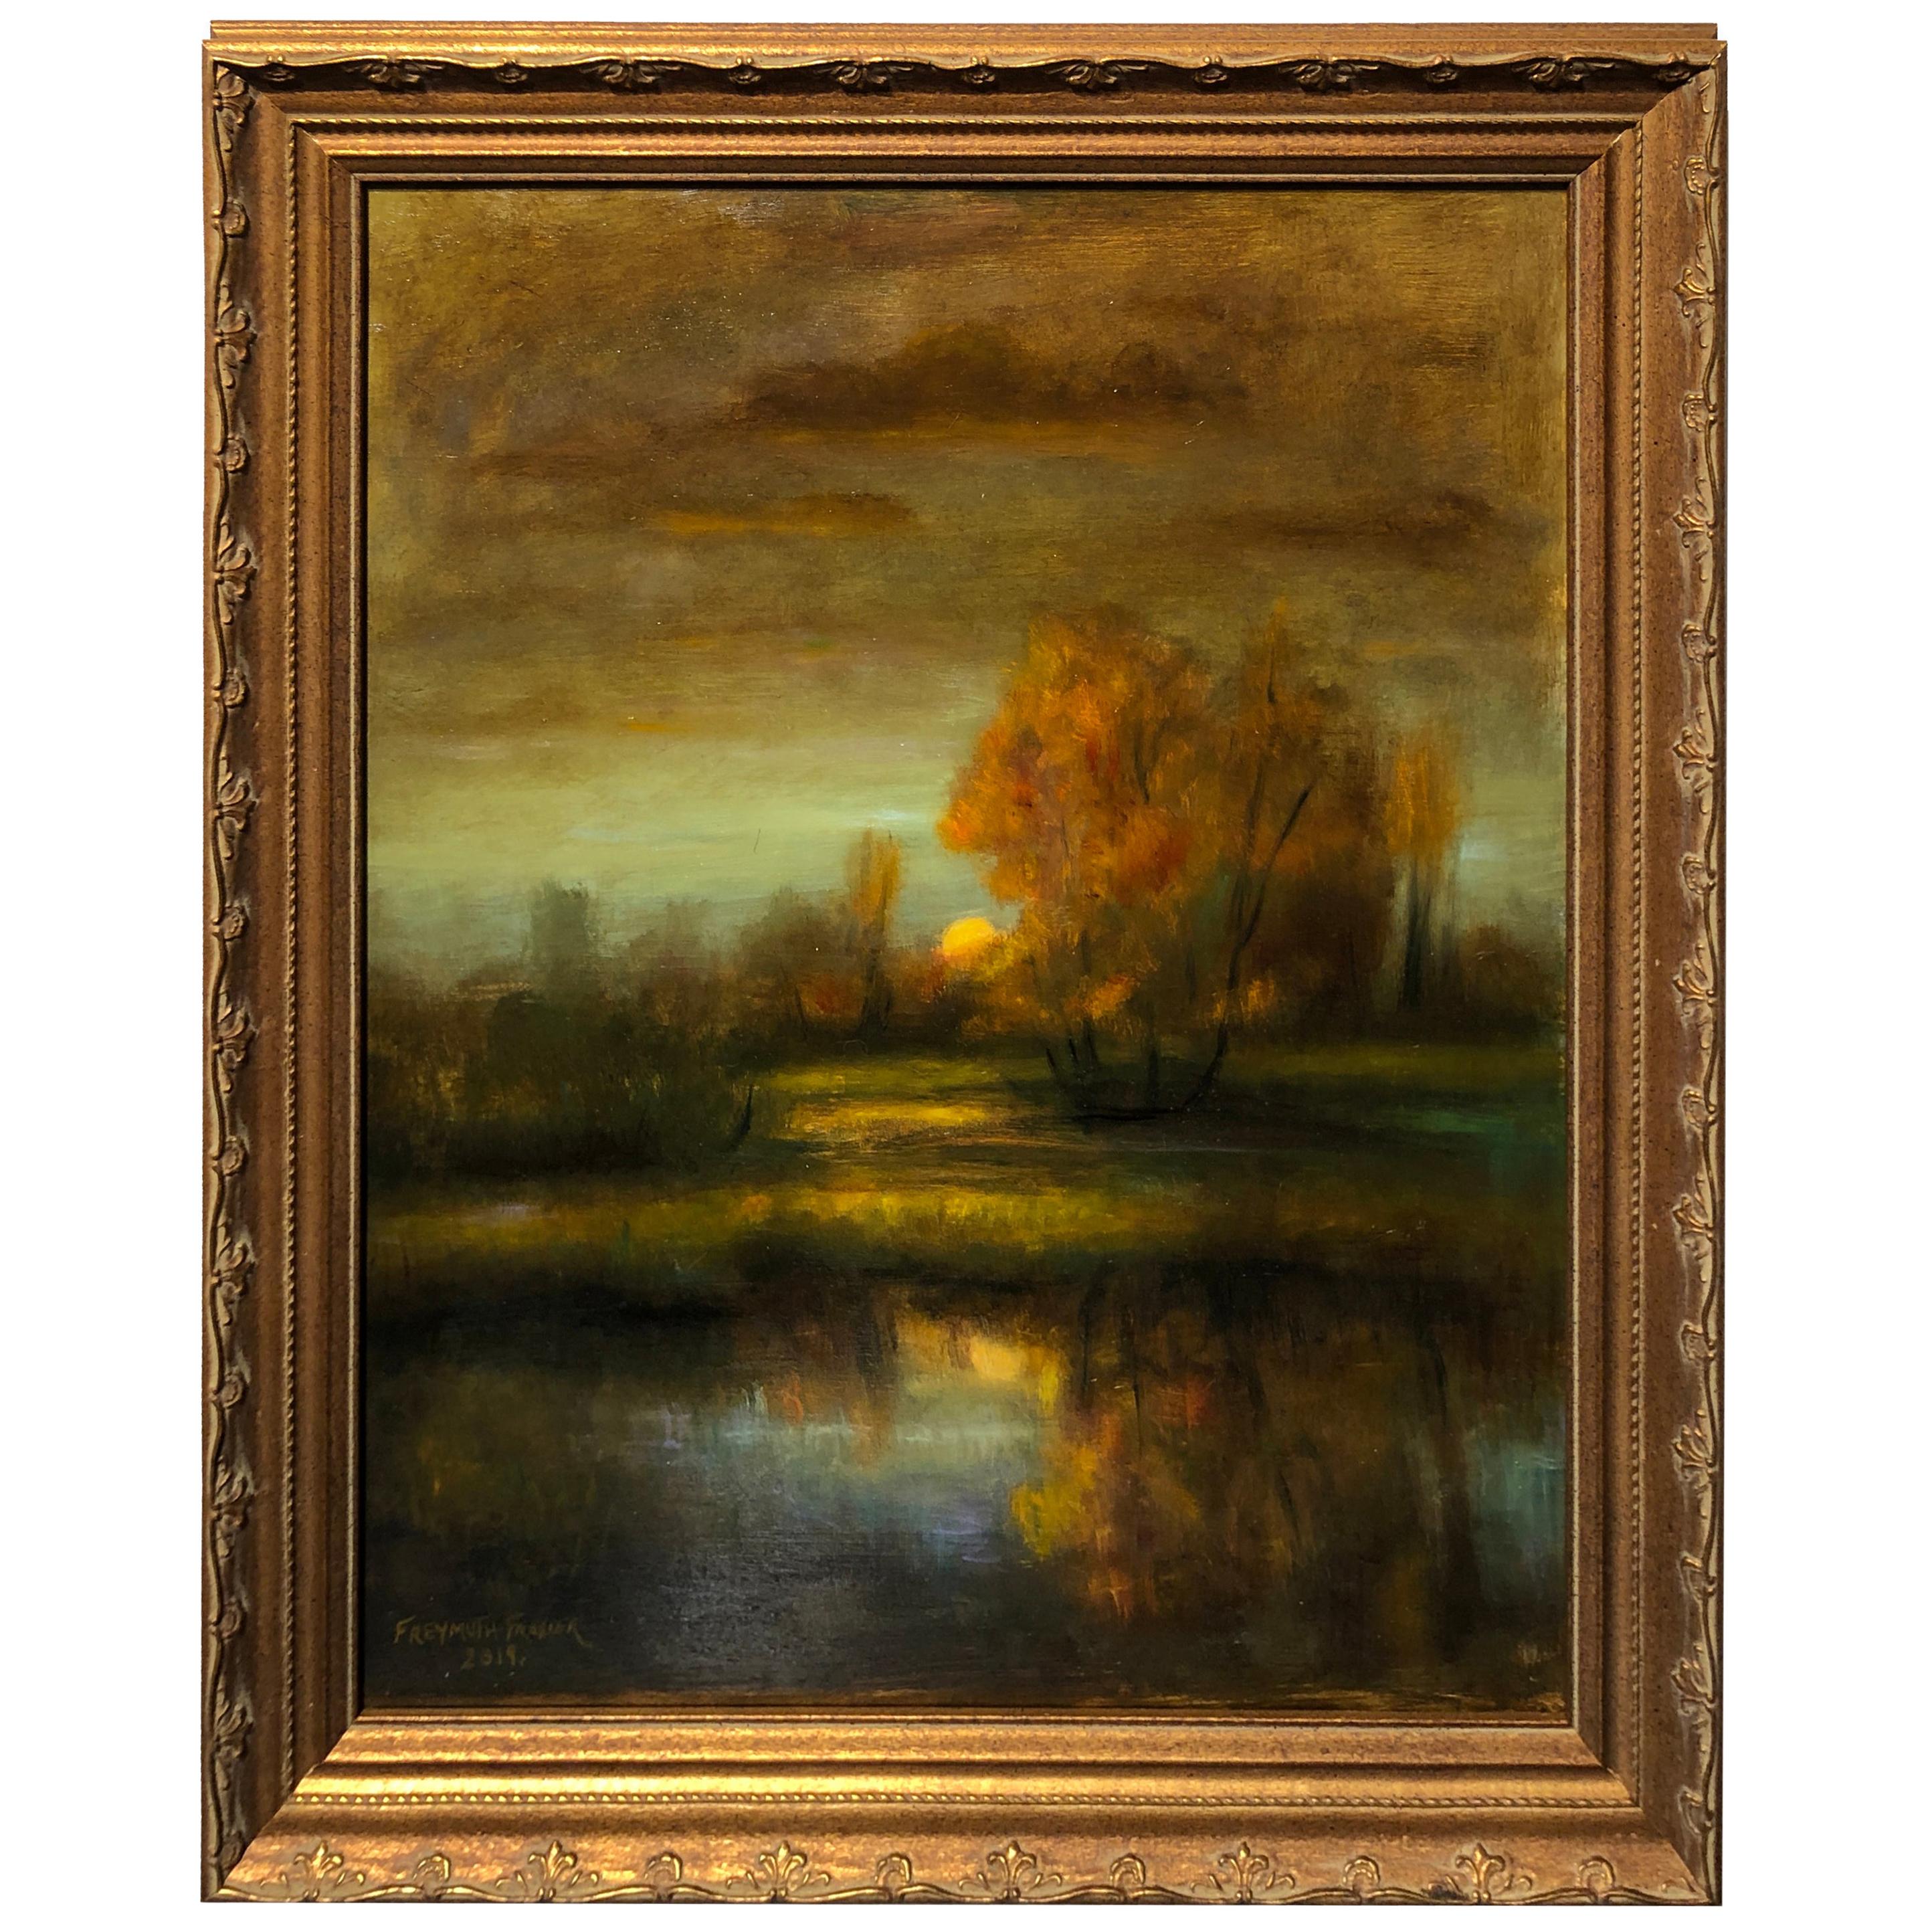 Falling Reflections Original Oil Painting, Soft Light Reflecting Romantic Colors